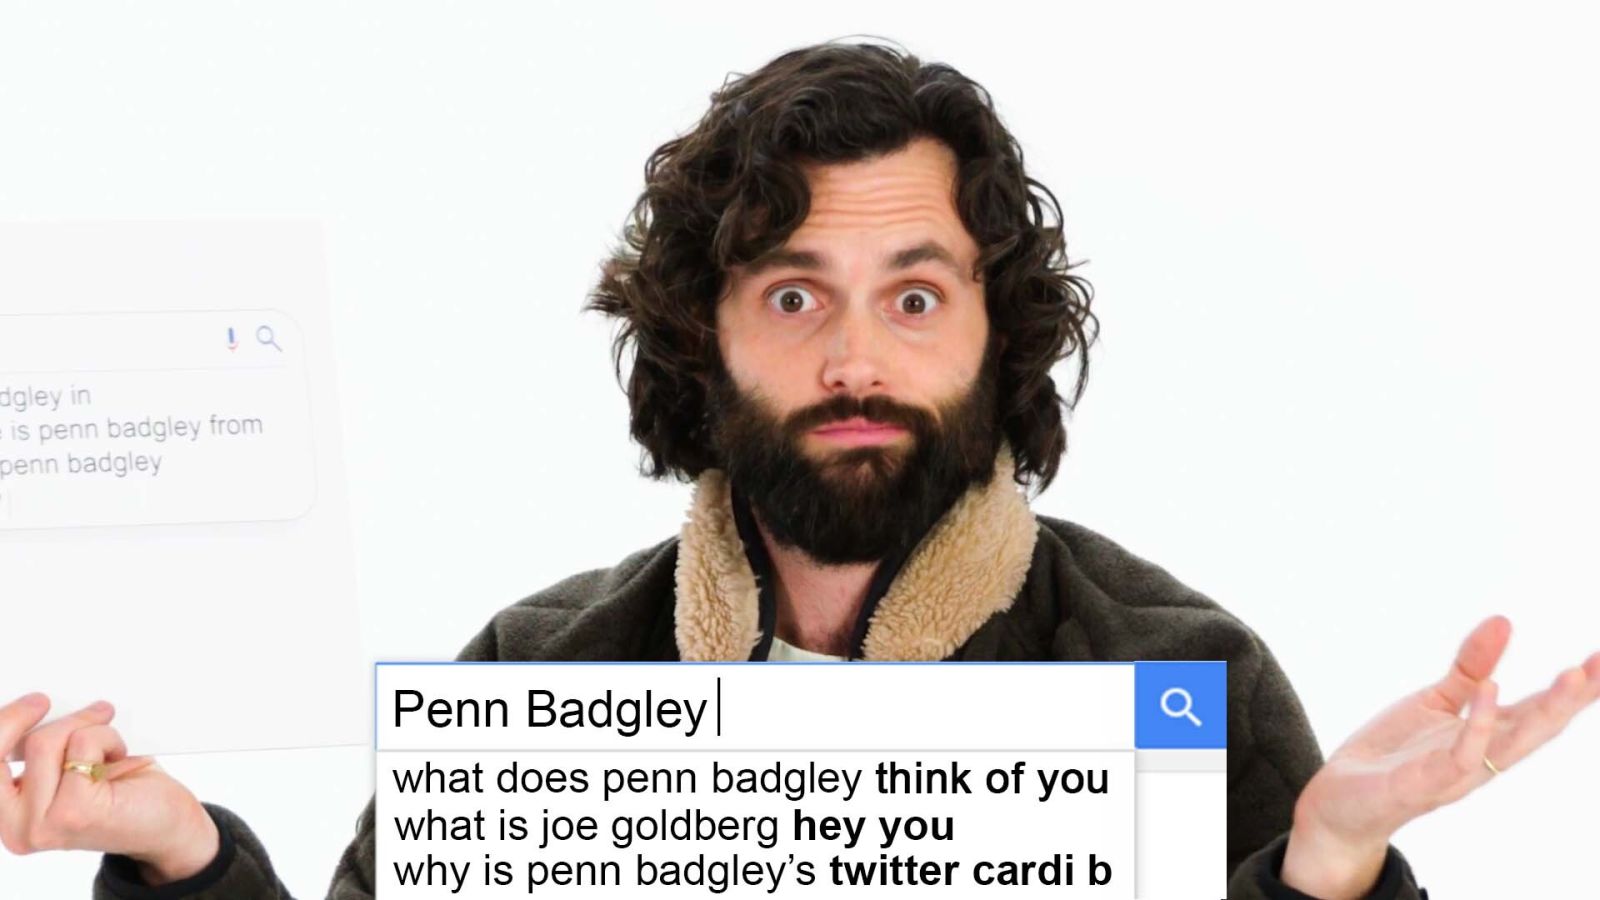 Penn Badgley Answers the Web's Most Searched Questions